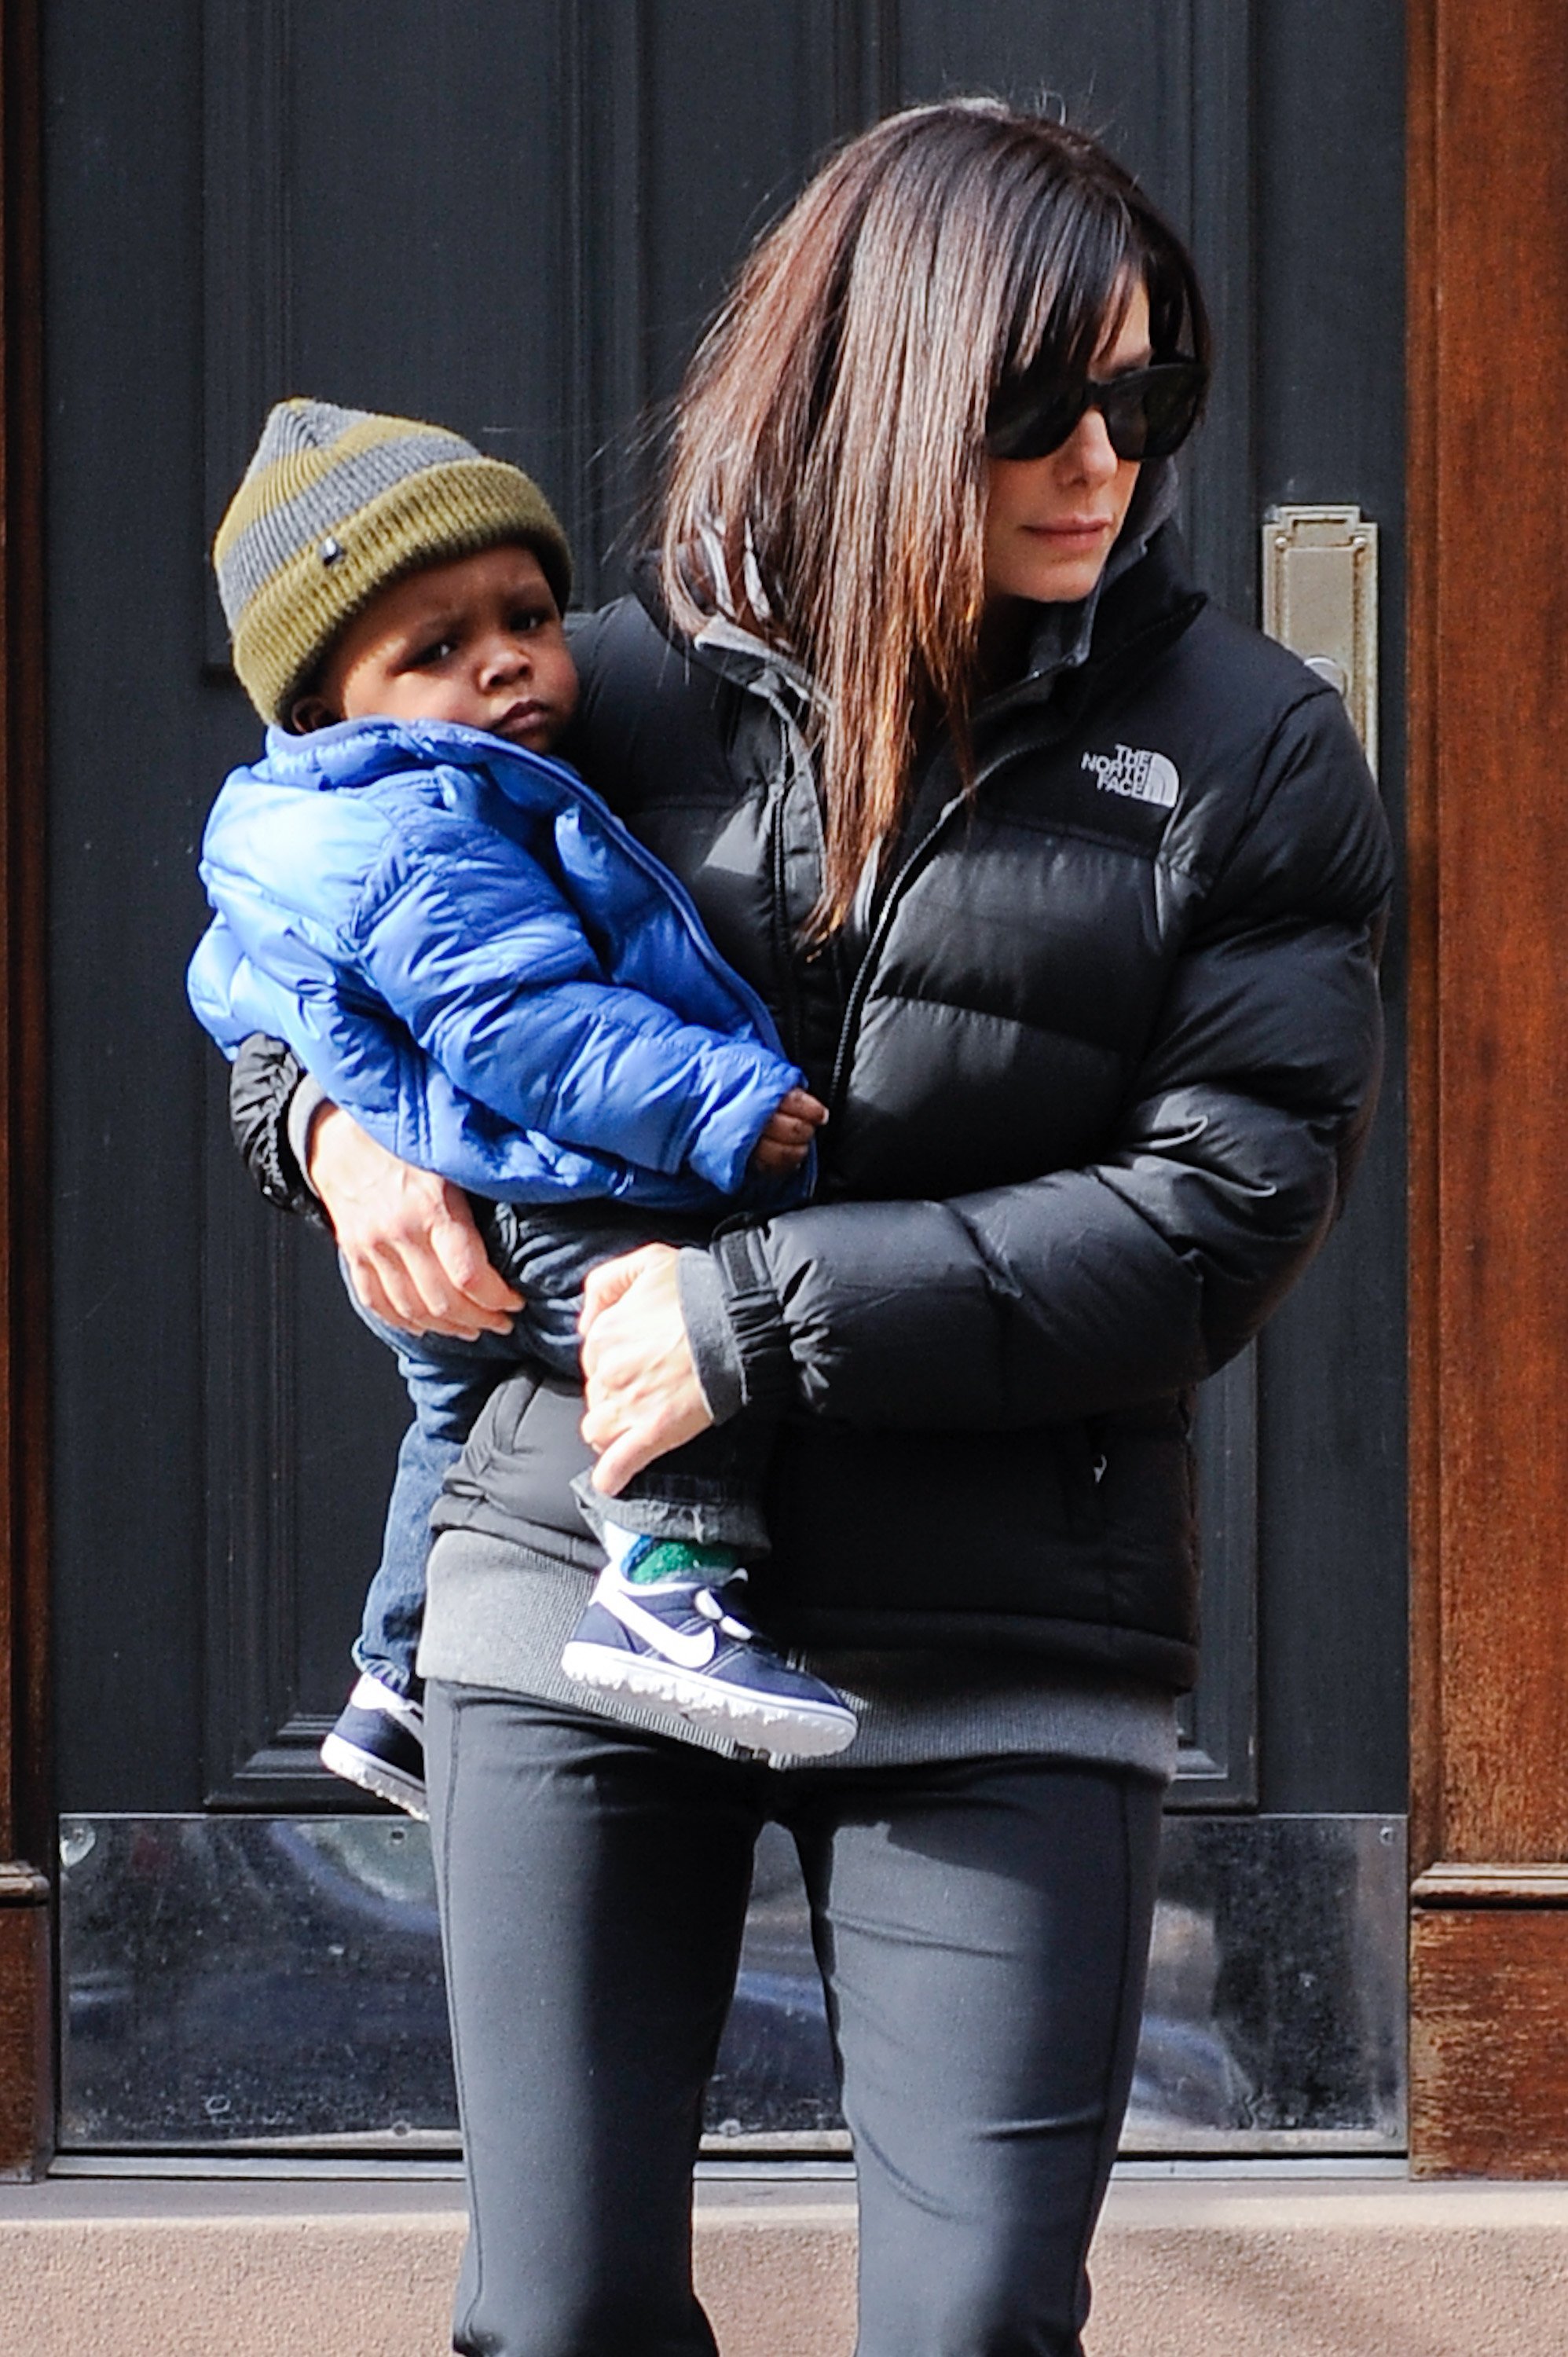 Sandra Bullock walking in public holding one of her children | Photo: Getty Images